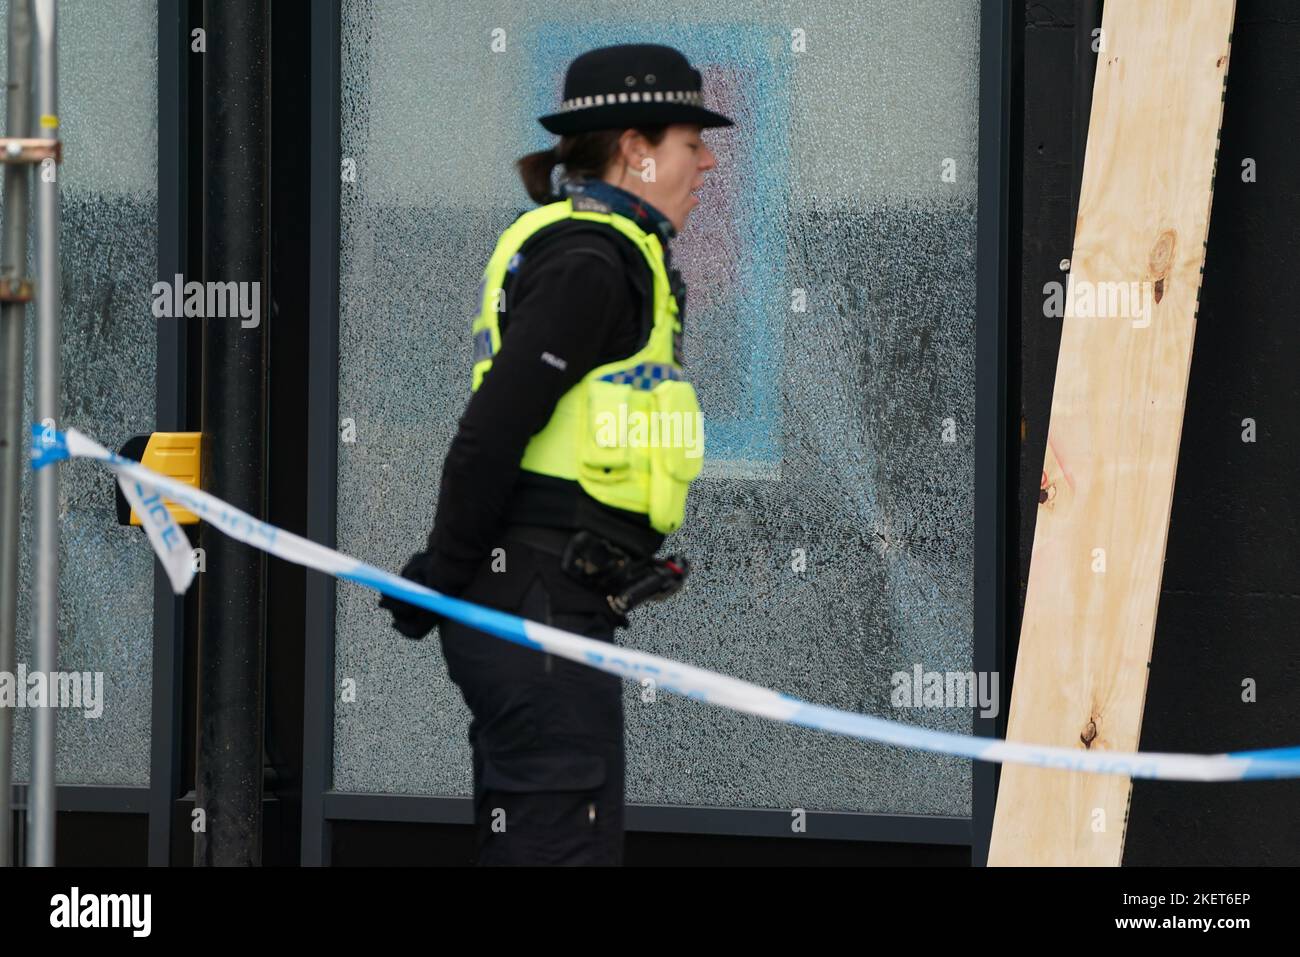 Workmen repairs windows at Barclays Clyde Place Quay branch in Glasgow, after they were broken by members from Extinction Rebellion Scotland as they demand Barclays cut its ties with fossil fuel firms. The protest is part of Extinction Rebellion and Money Rebellion's UK-wide Better without Barclays campaign of disruption. Picture date: Monday November 14, 2022. Stock Photo